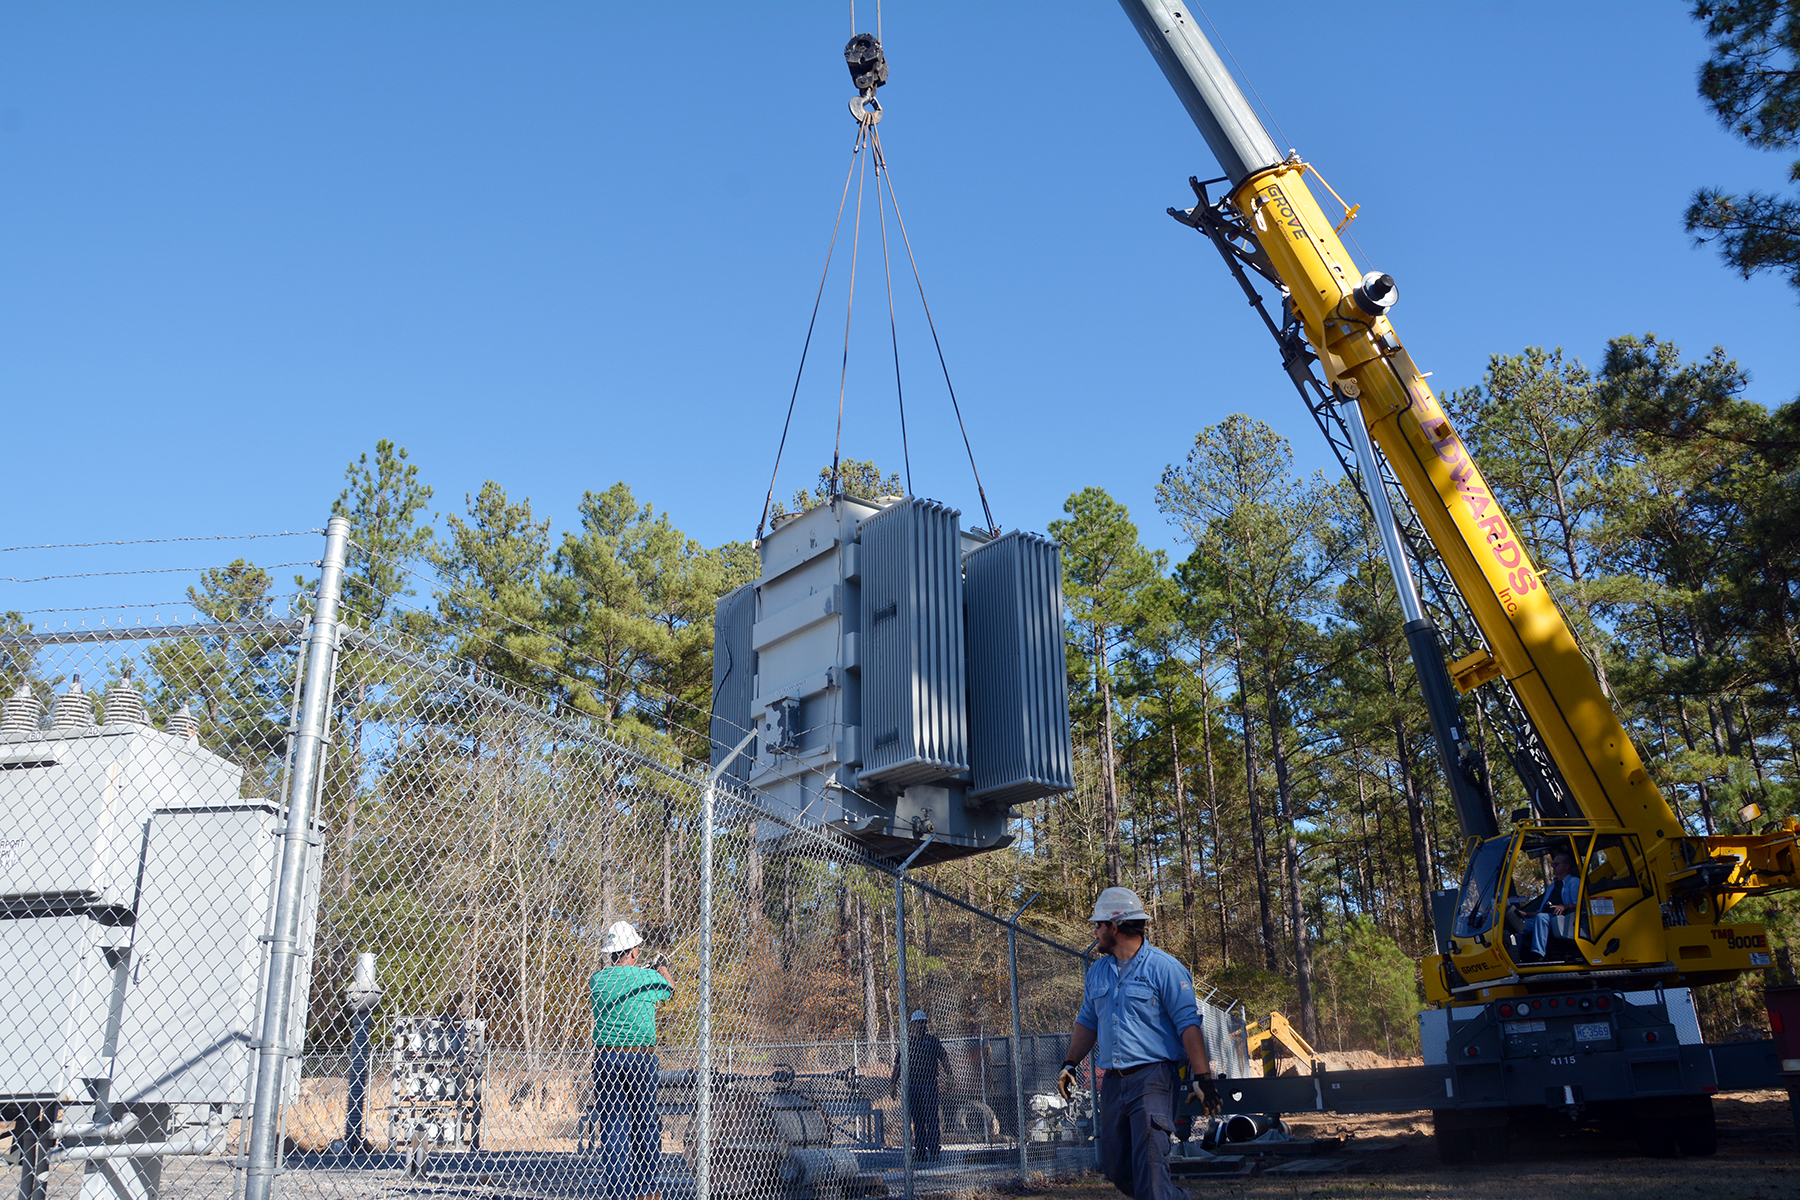 A crew from Duke Energy works with an Edwards Inc. crane operator to install a 115,000-volt transformer into Richmond Community College’s substation. Duke Energy donated the transformer to the College’s Electric Utility Substation and Relay Technology program.